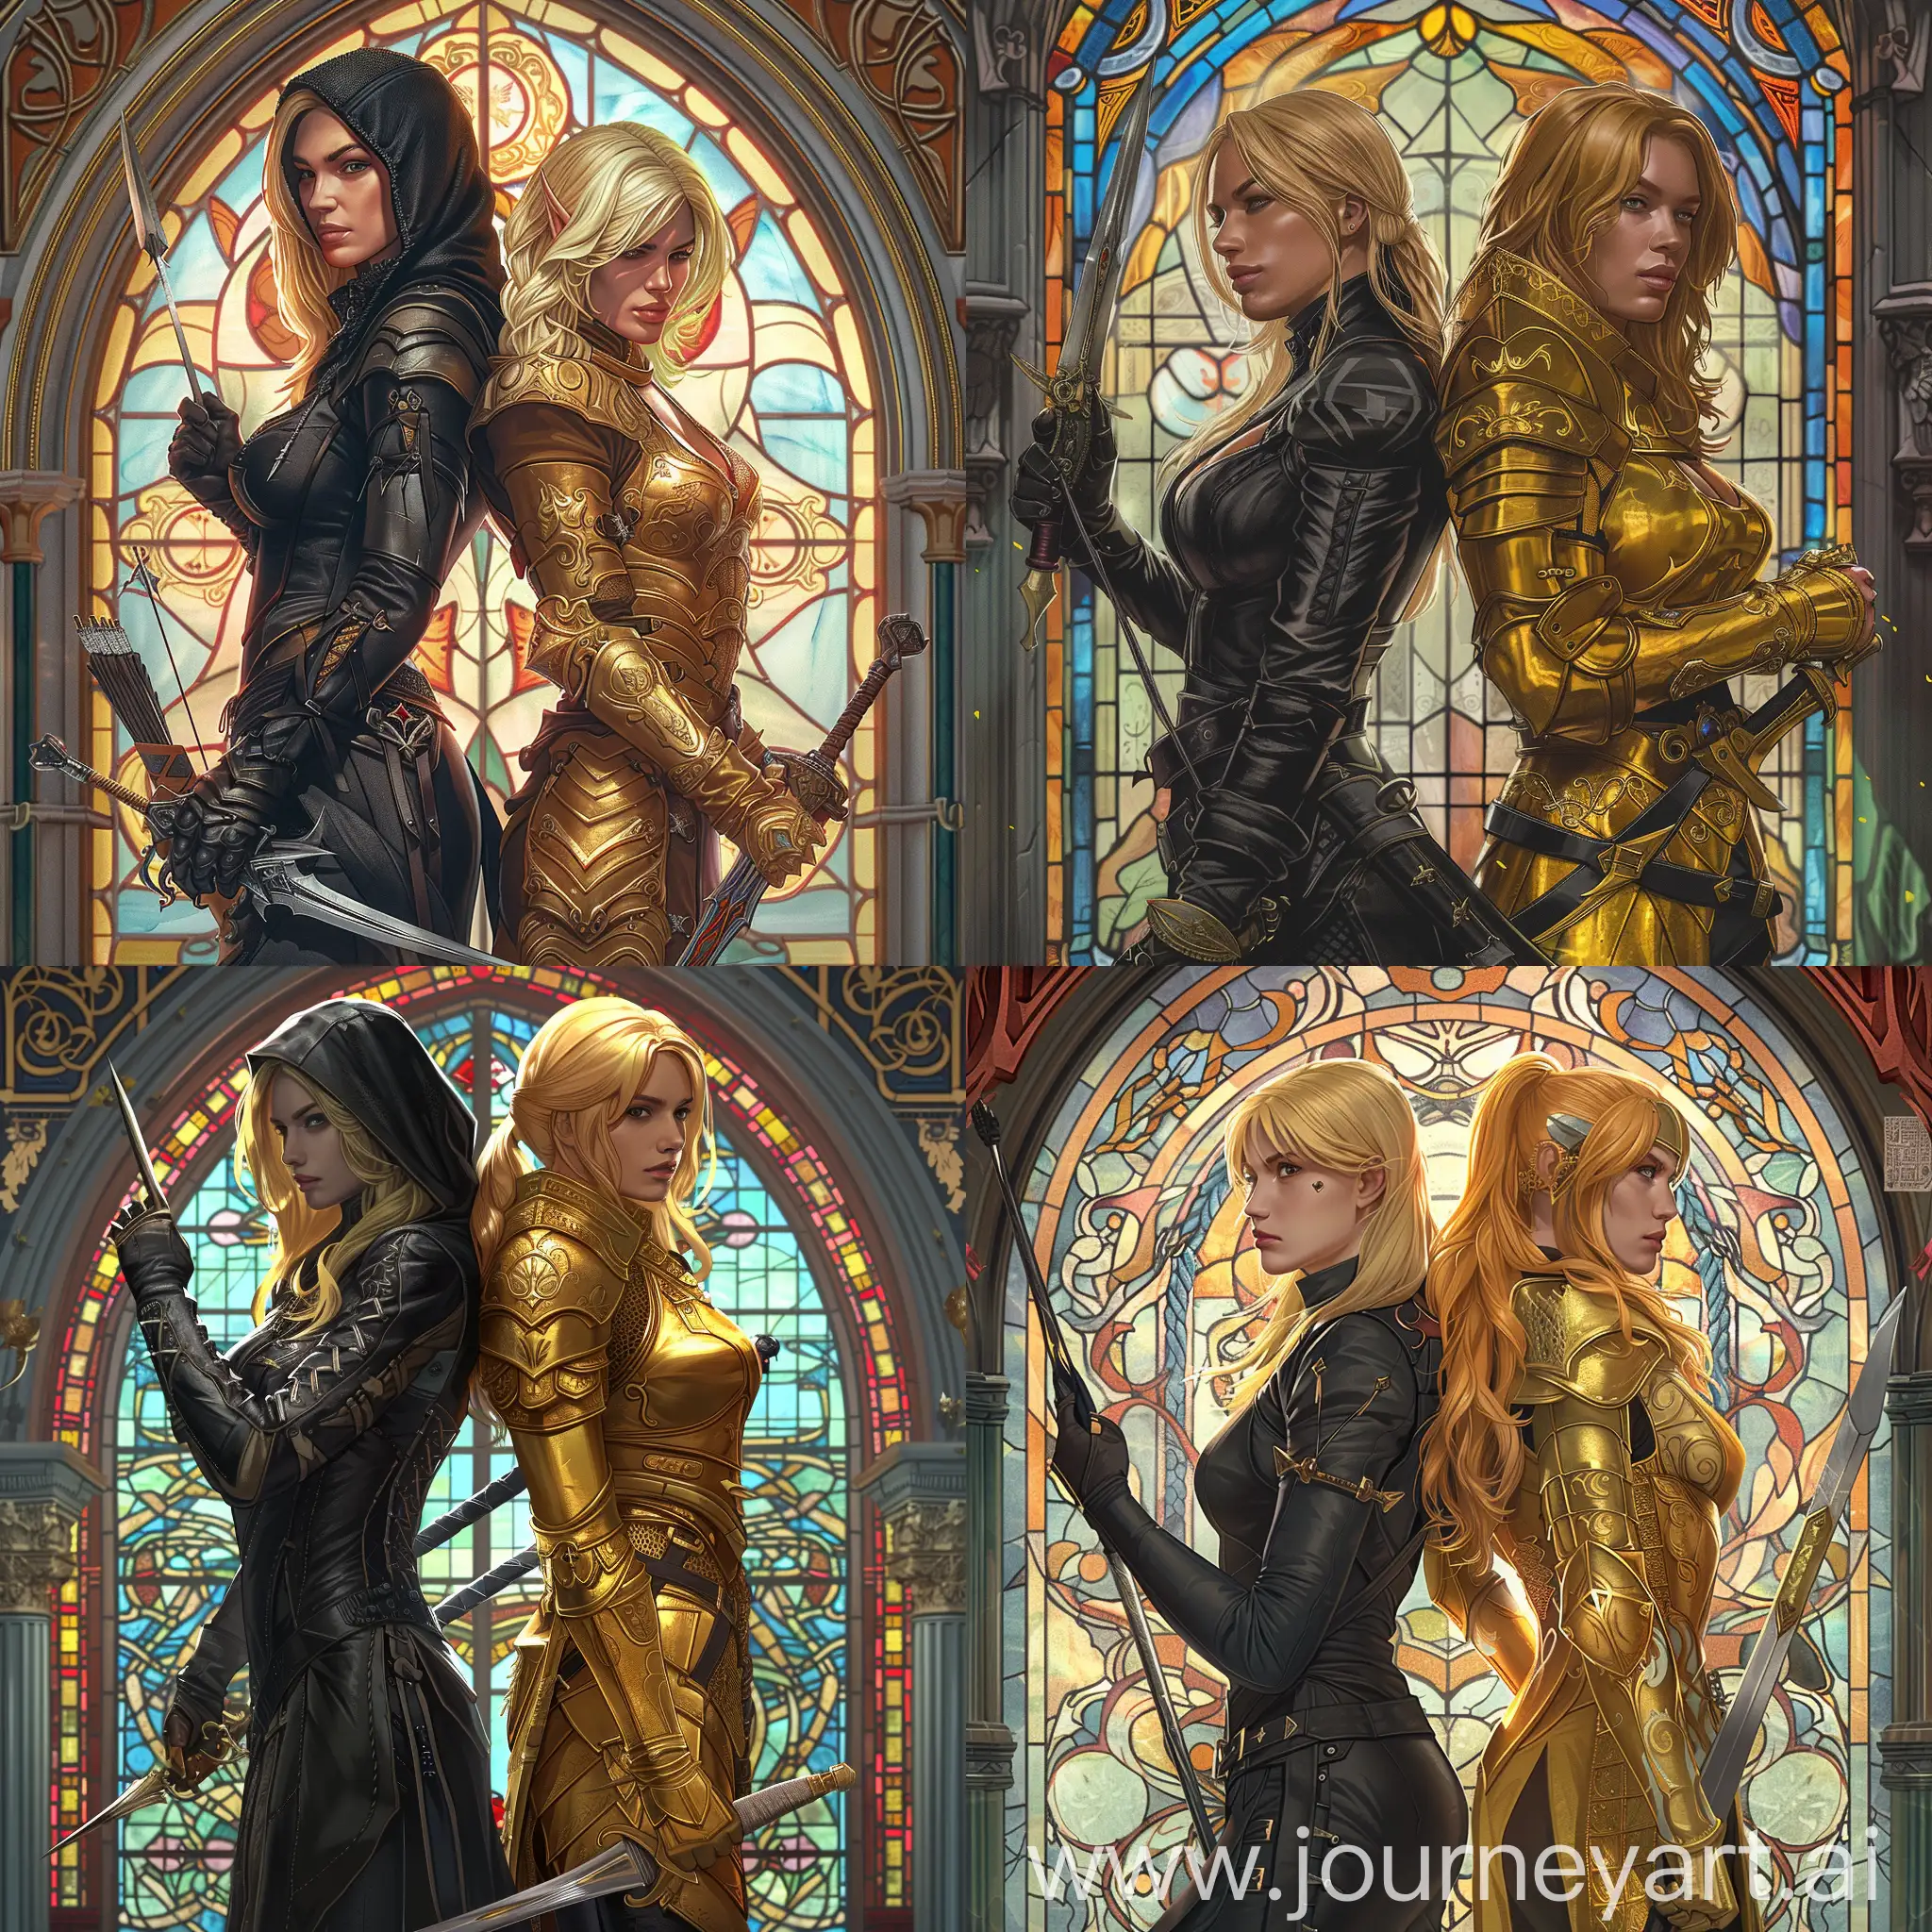 Blonde-and-Golden-Haired-Female-Assassins-in-Stained-Glass-Ambience